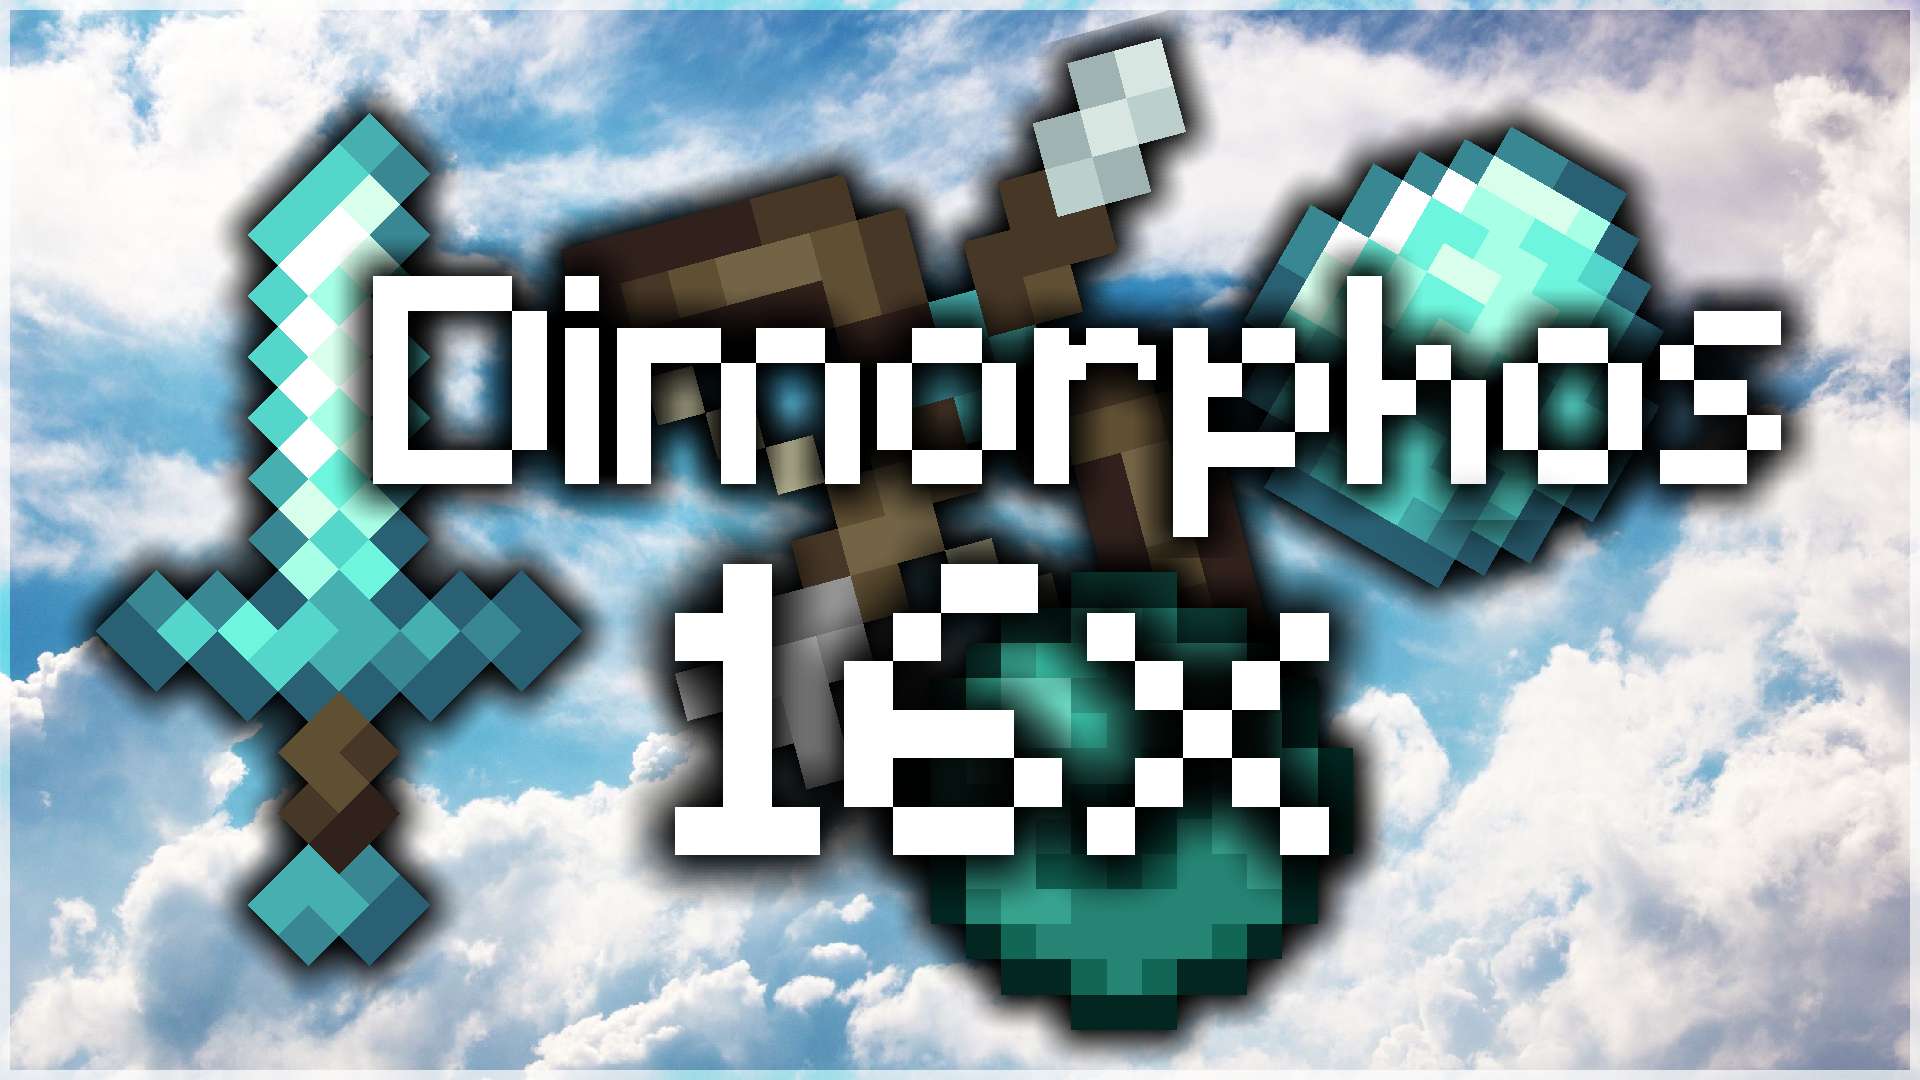 Dimorphos 16x by toileh on PvPRP